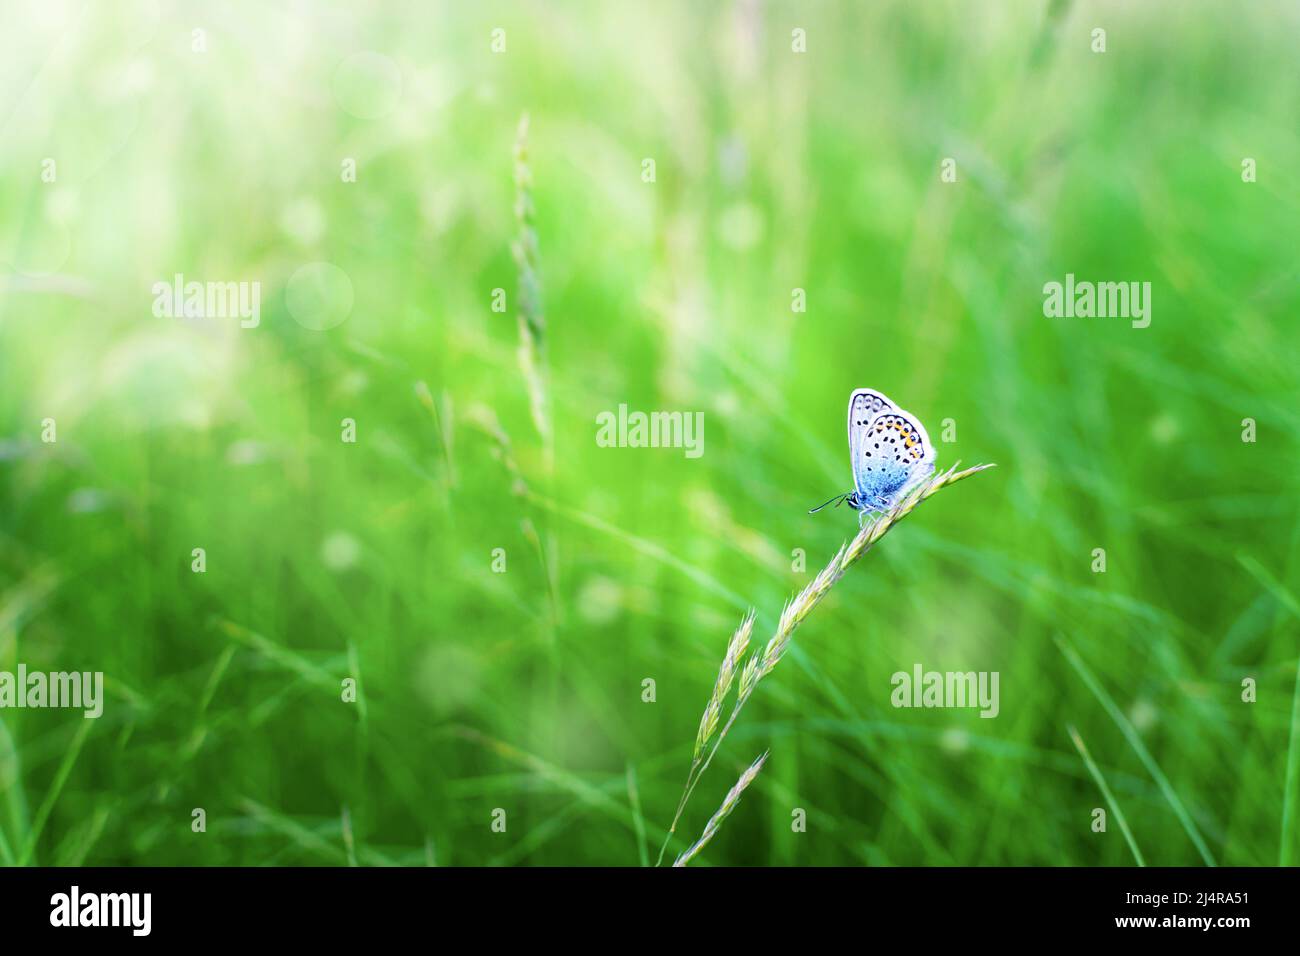 The blue butterfly Plebejus argus rests and sits on the grass against a blurred green background in the sun. Common small blue butterfly in its Stock Photo